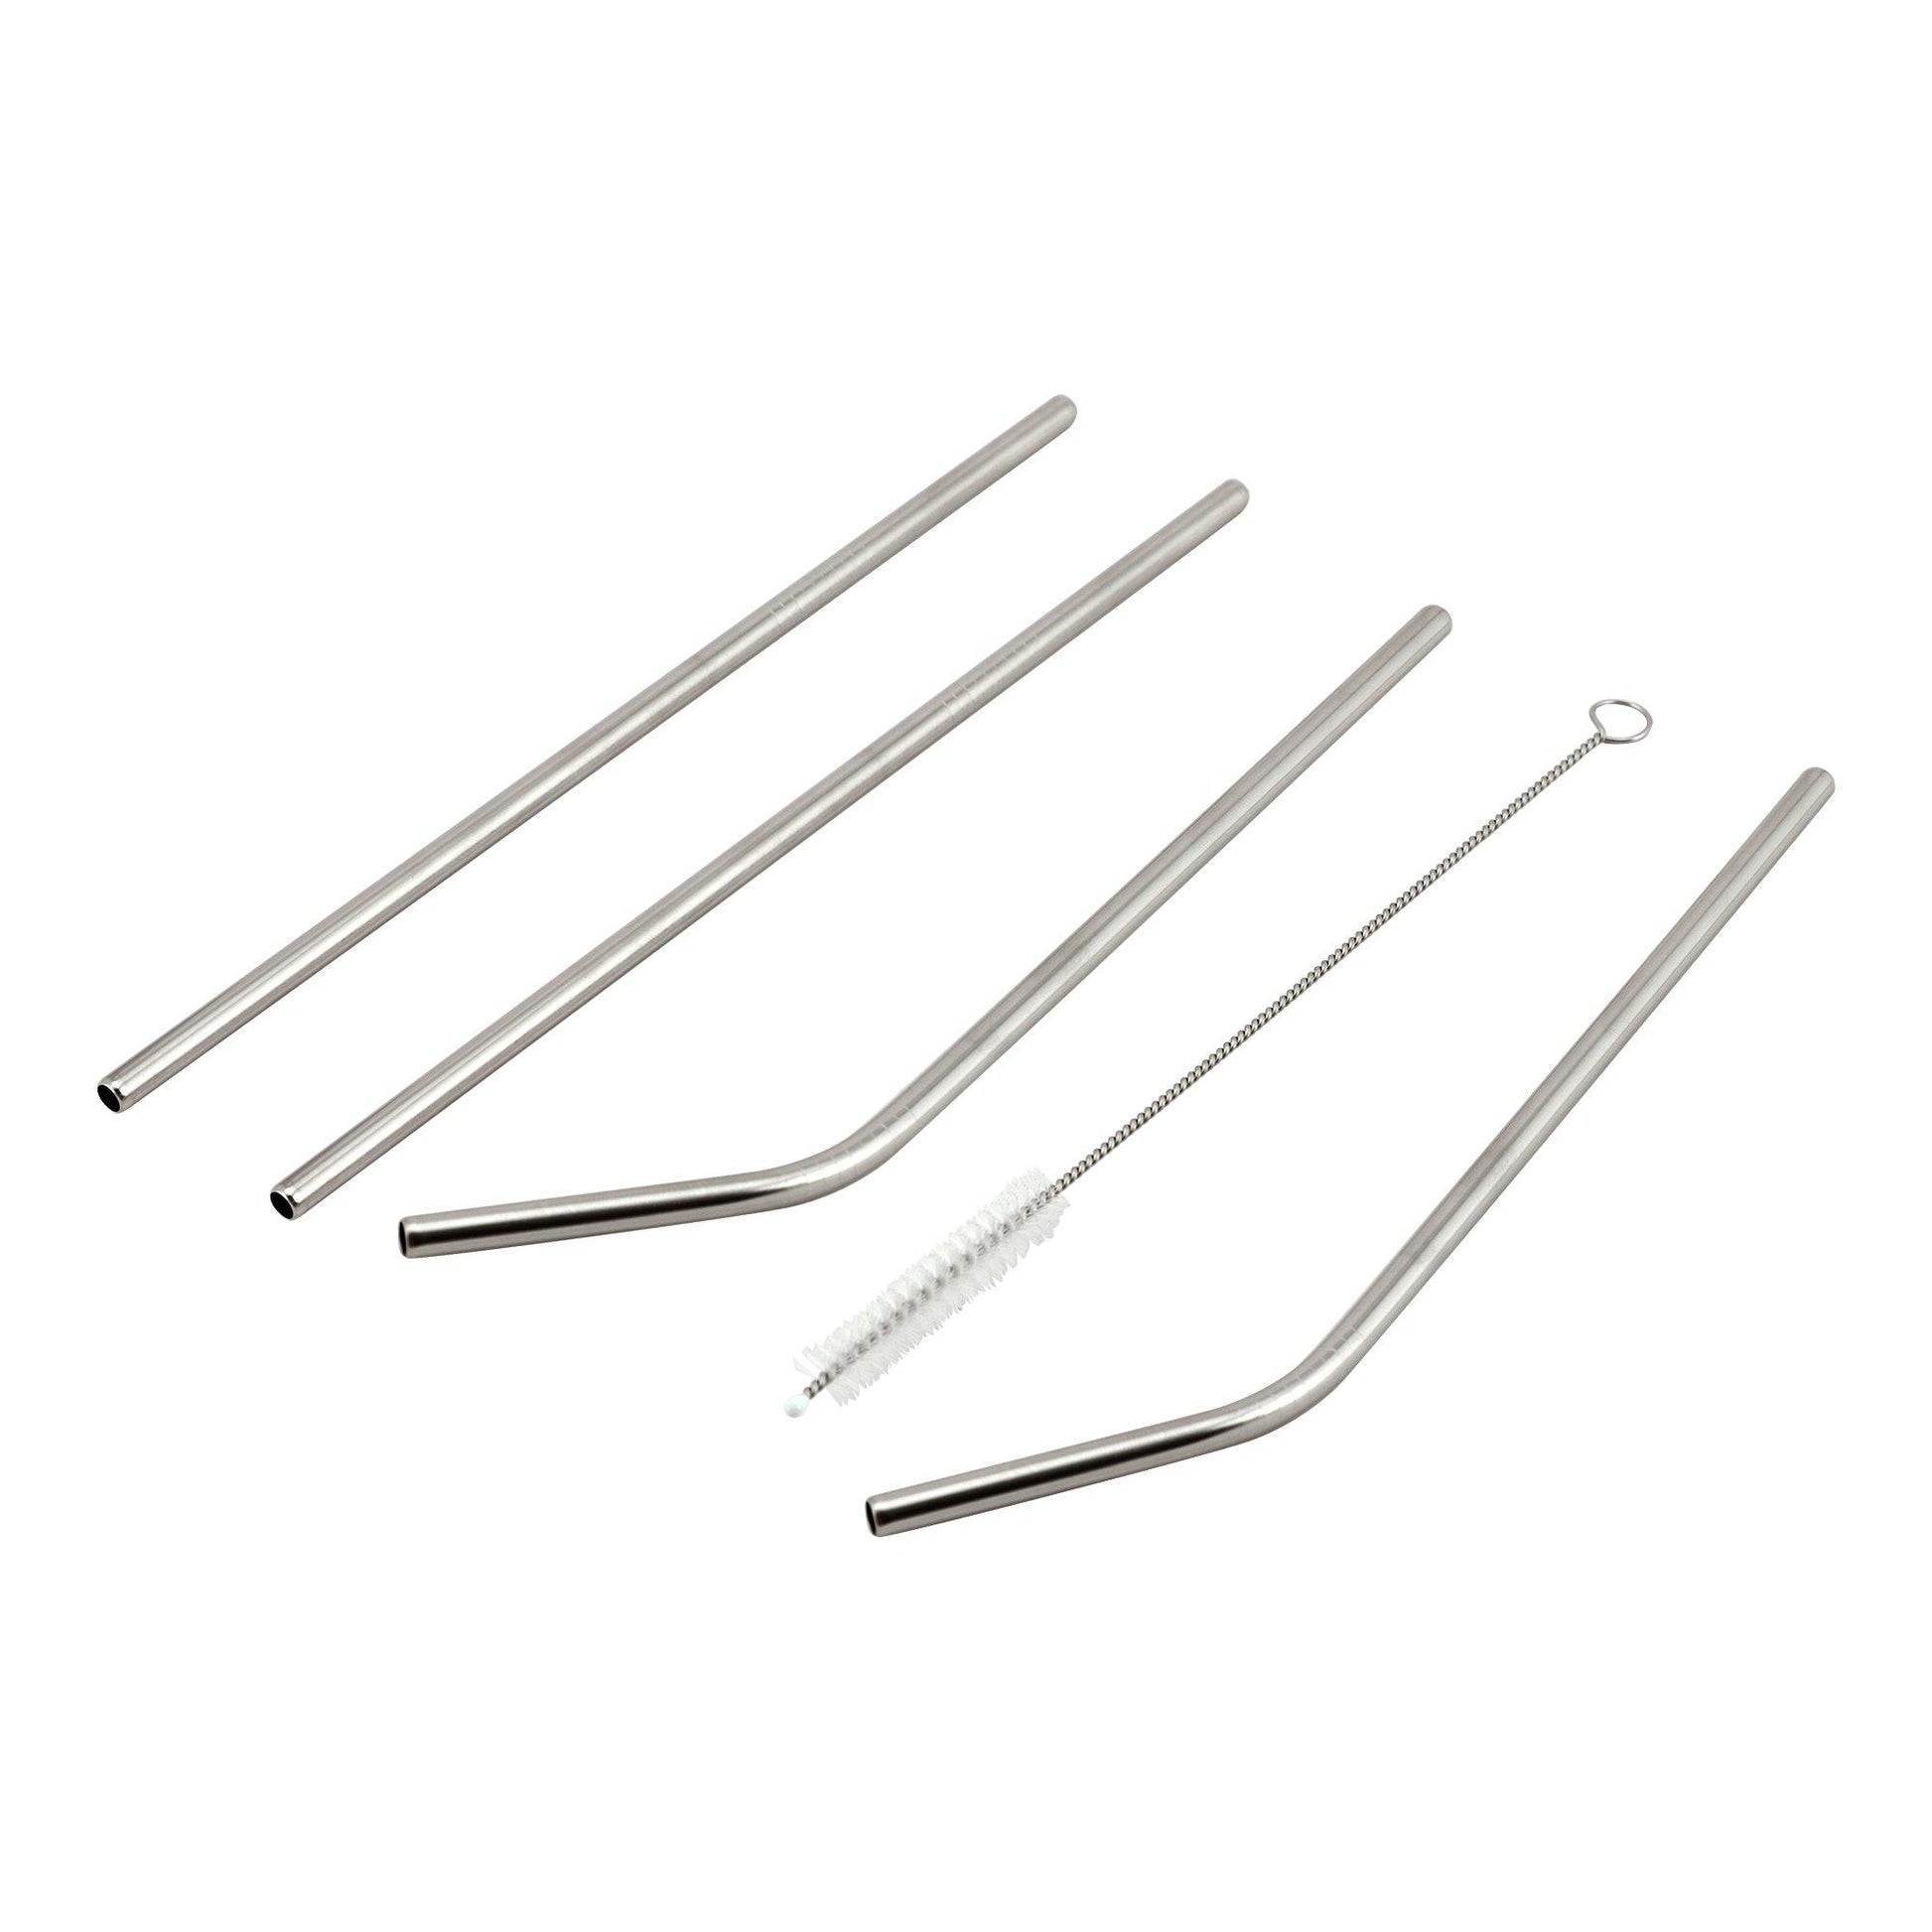 Reusable Stainless Steel Straws - The Umbrella store